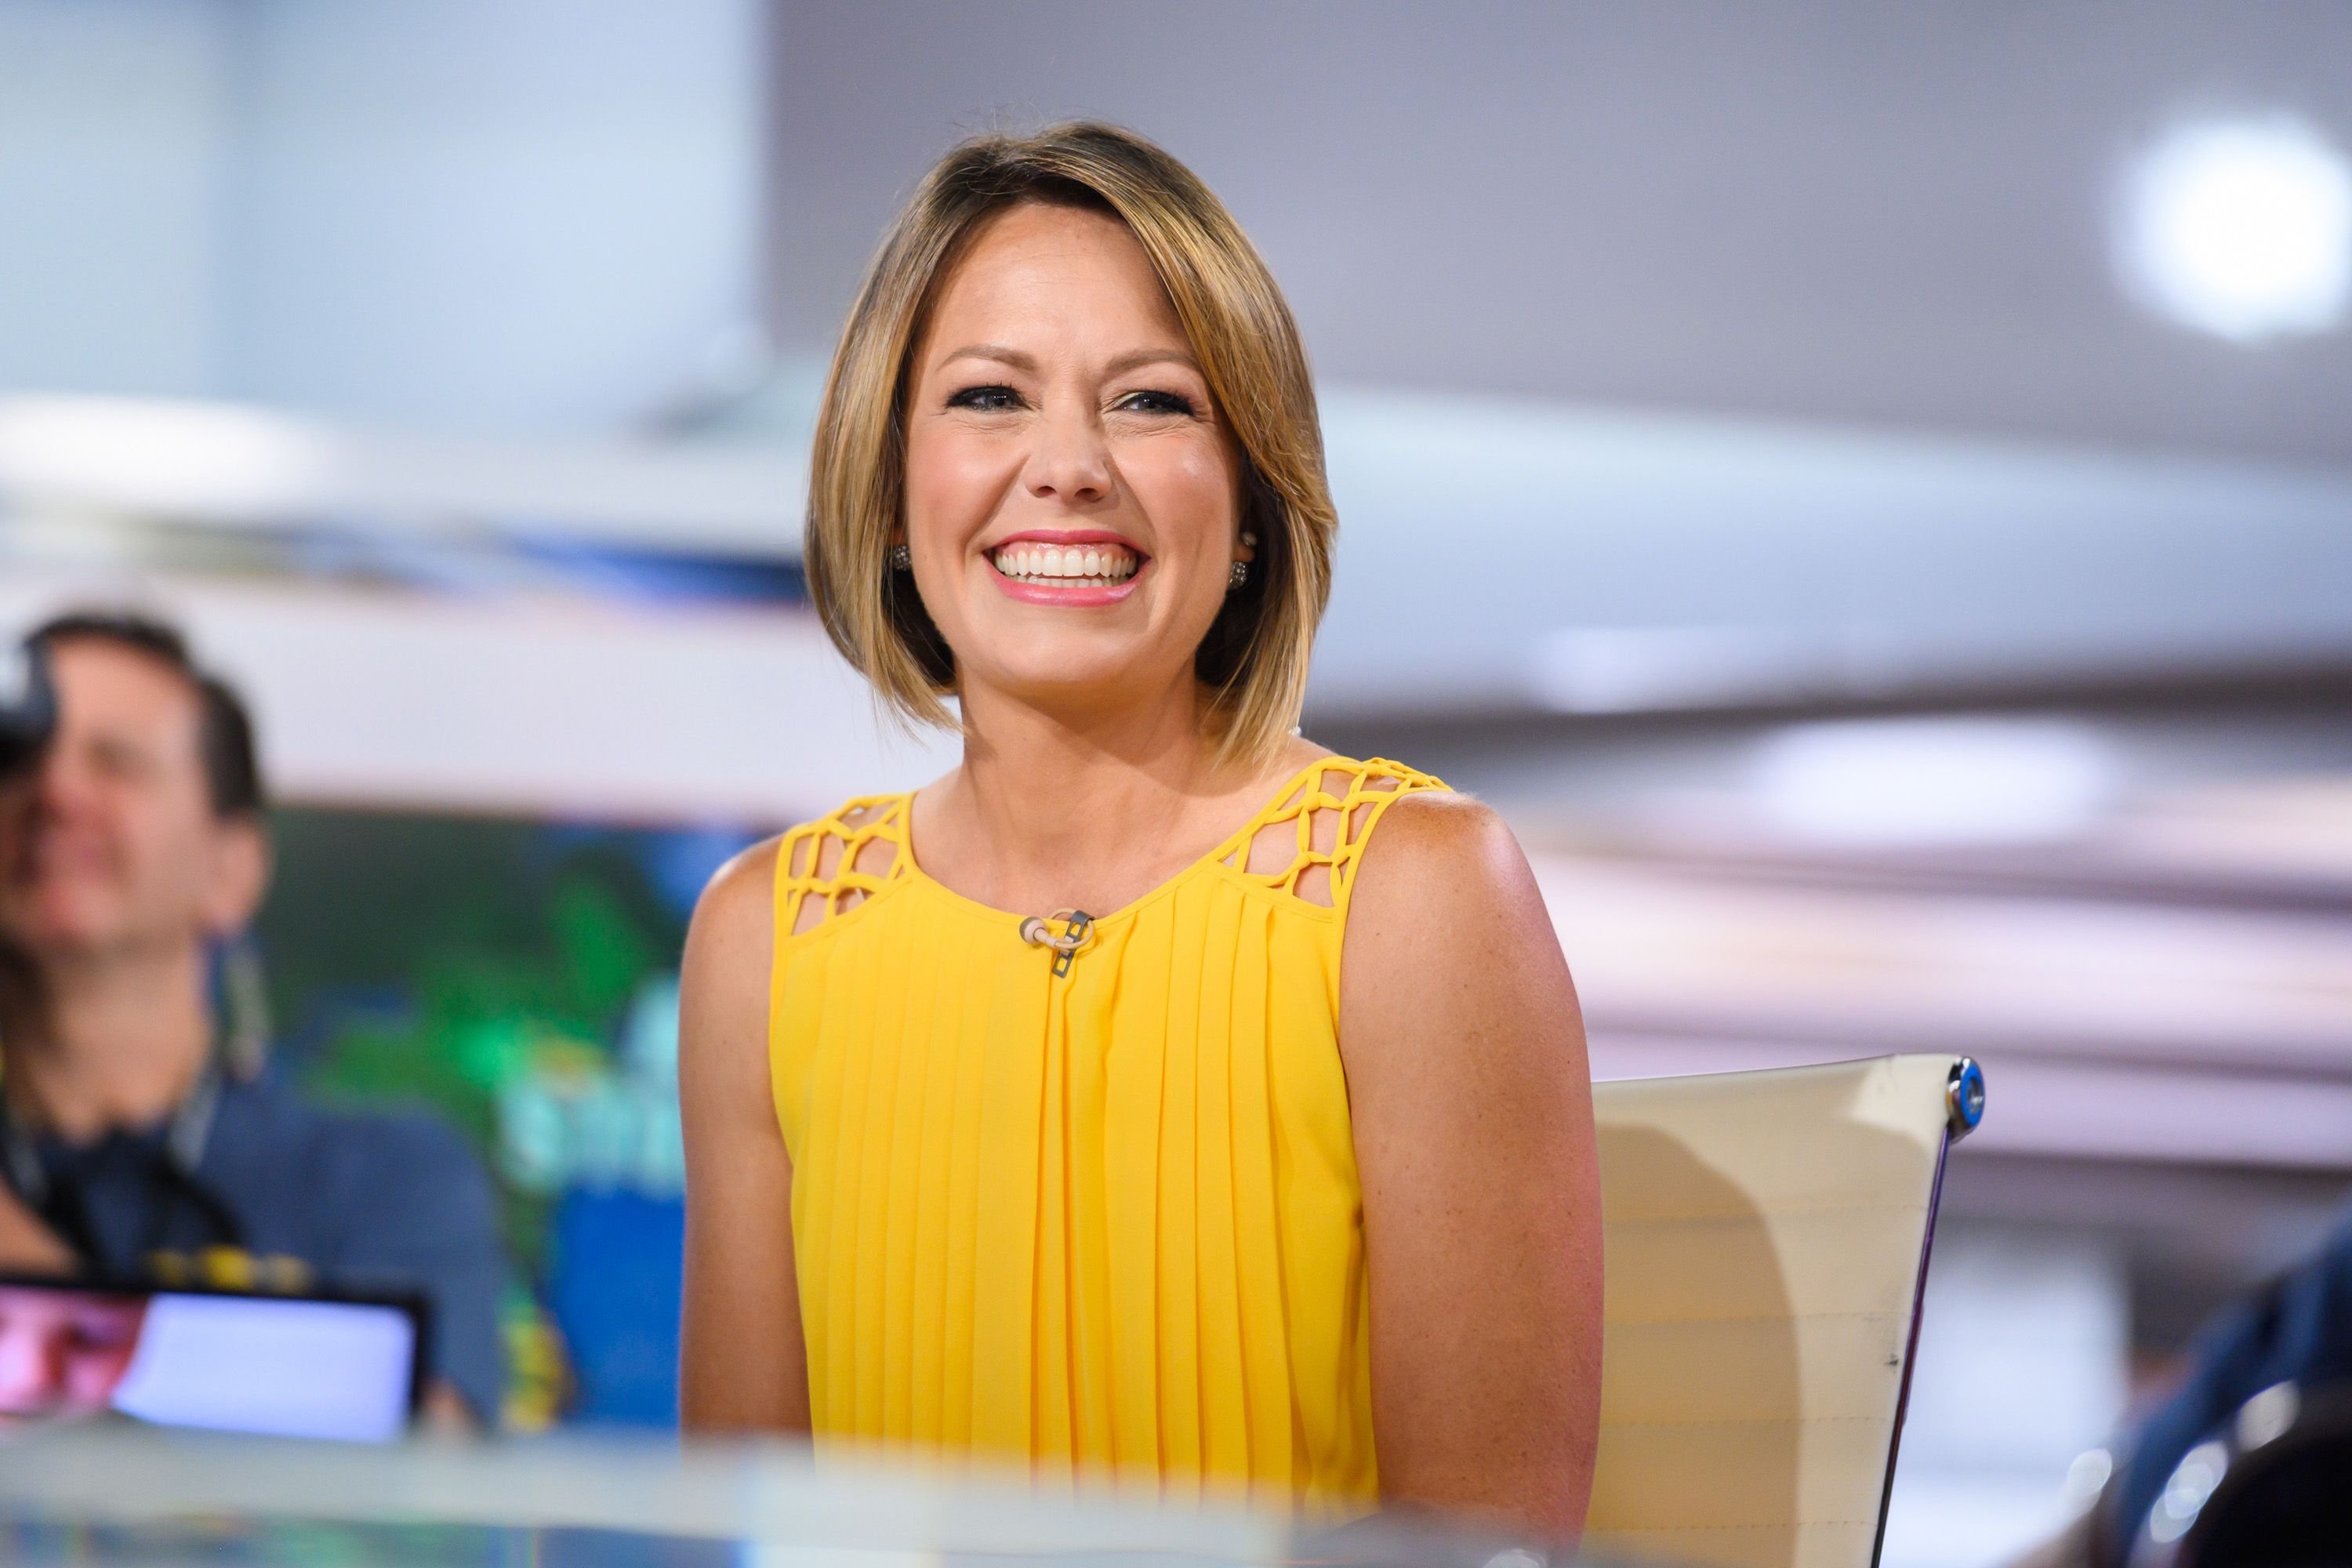 Dylan Dreyer on season 68 of the "Today" show on July 17, 2019 | Photo: Nathan Congleton/NBCU Photo Bank/NBCUniversal/Getty Images